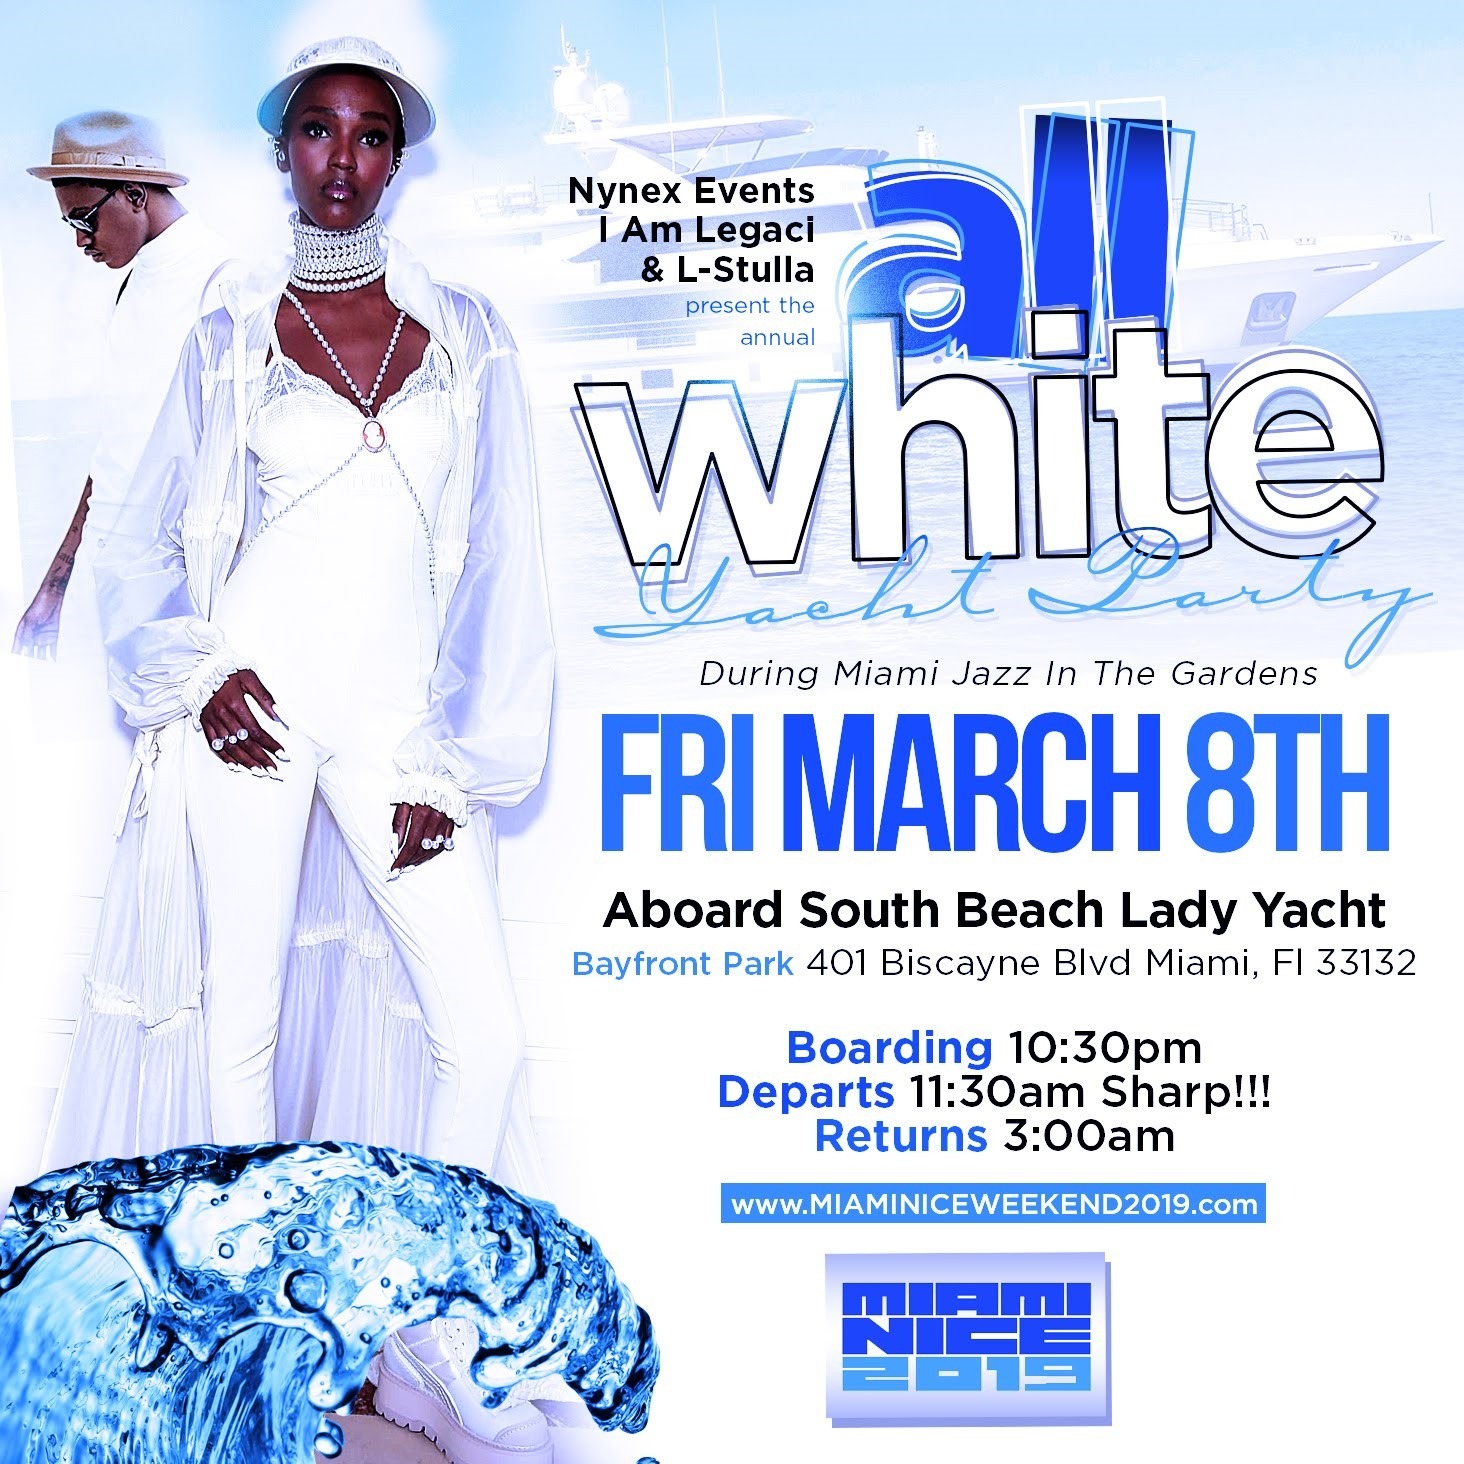 MIAMI NICE 2019 ANNUAL ALL WHITE YACHT PARTY TO START JAZZ IN THE GARDENS WEEKEND